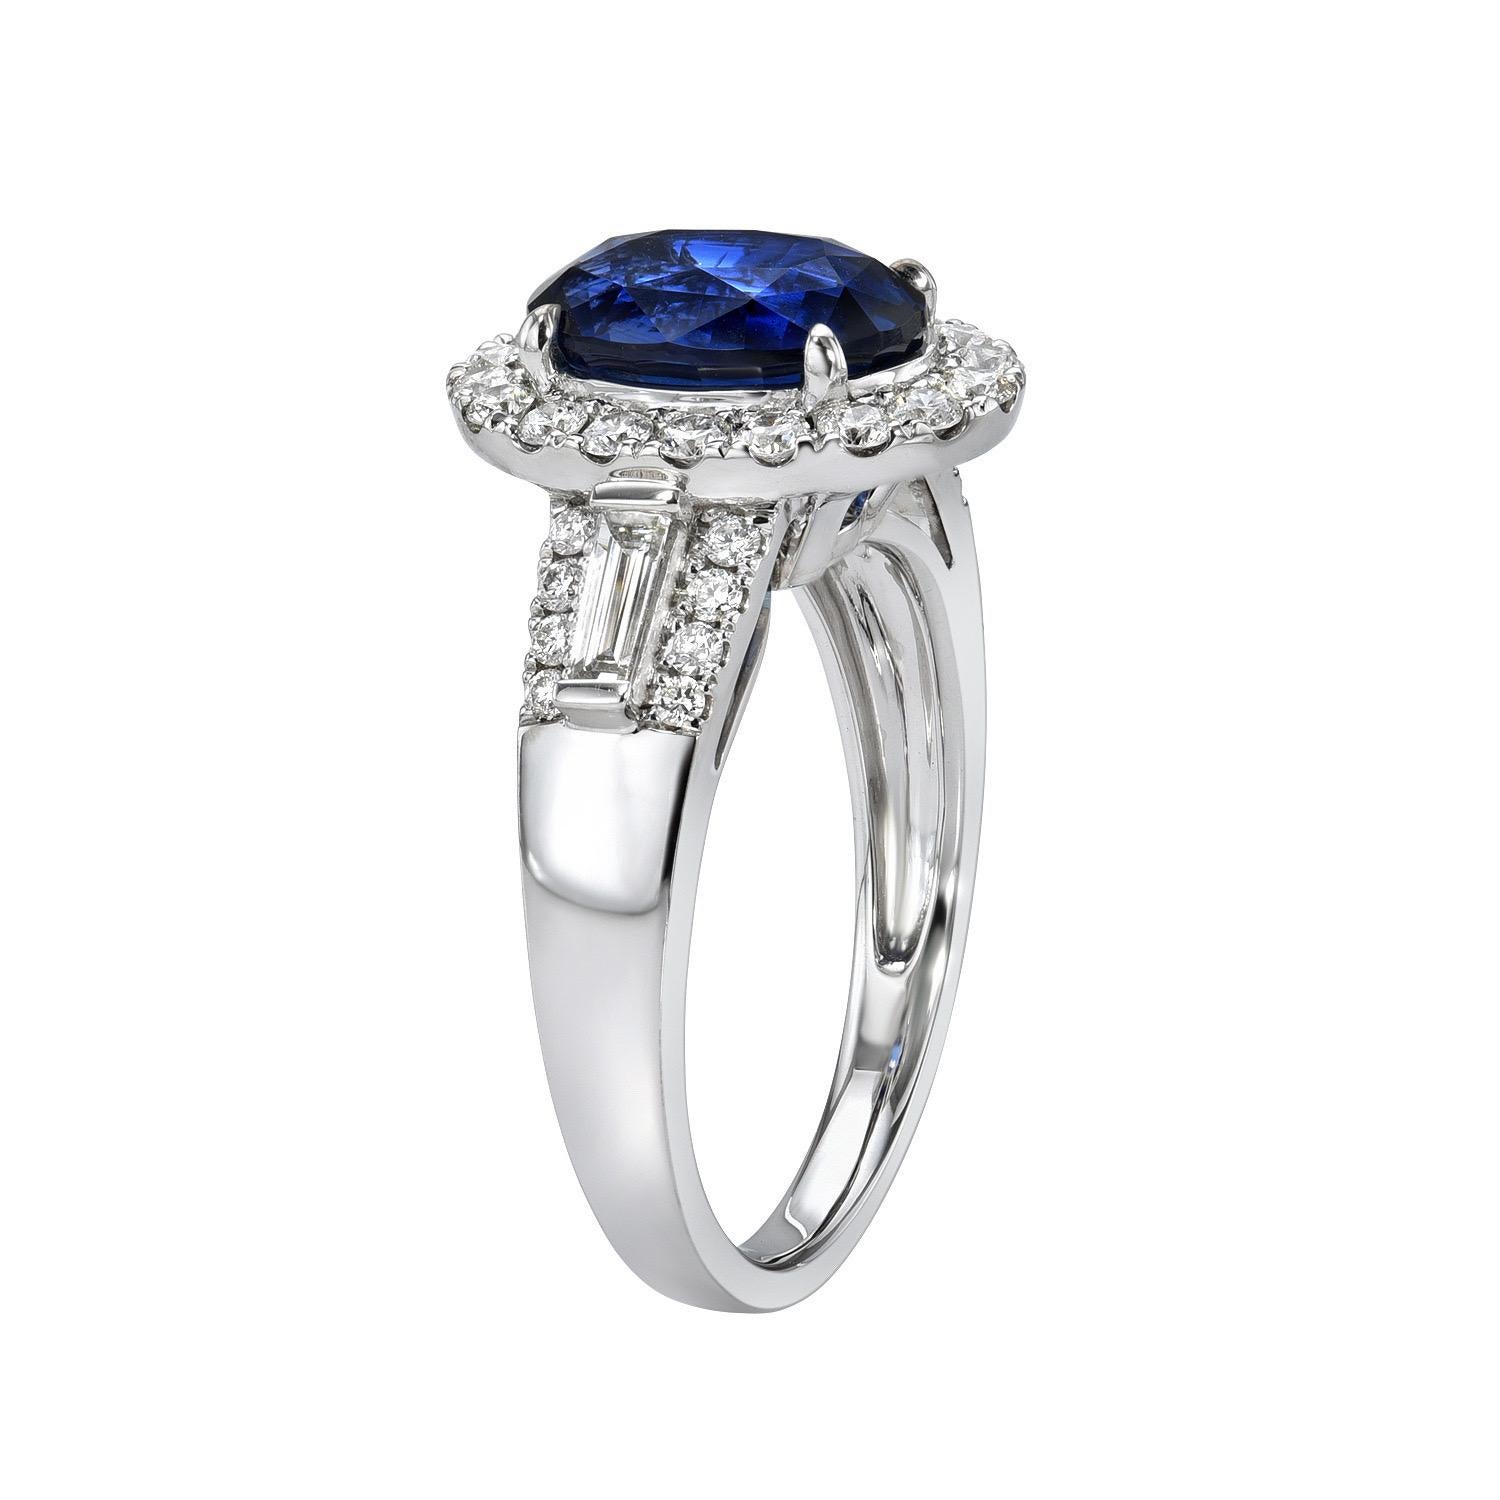 3.05 carat Royal Blue Sapphire oval 18K white gold ring, decorated with a pair of 0.20 carat total G-H/VS baguette diamonds, and a total of 0.52 carat round brilliant diamonds.
Ring size 6.5. Resizing is complementary upon request.
Returns are